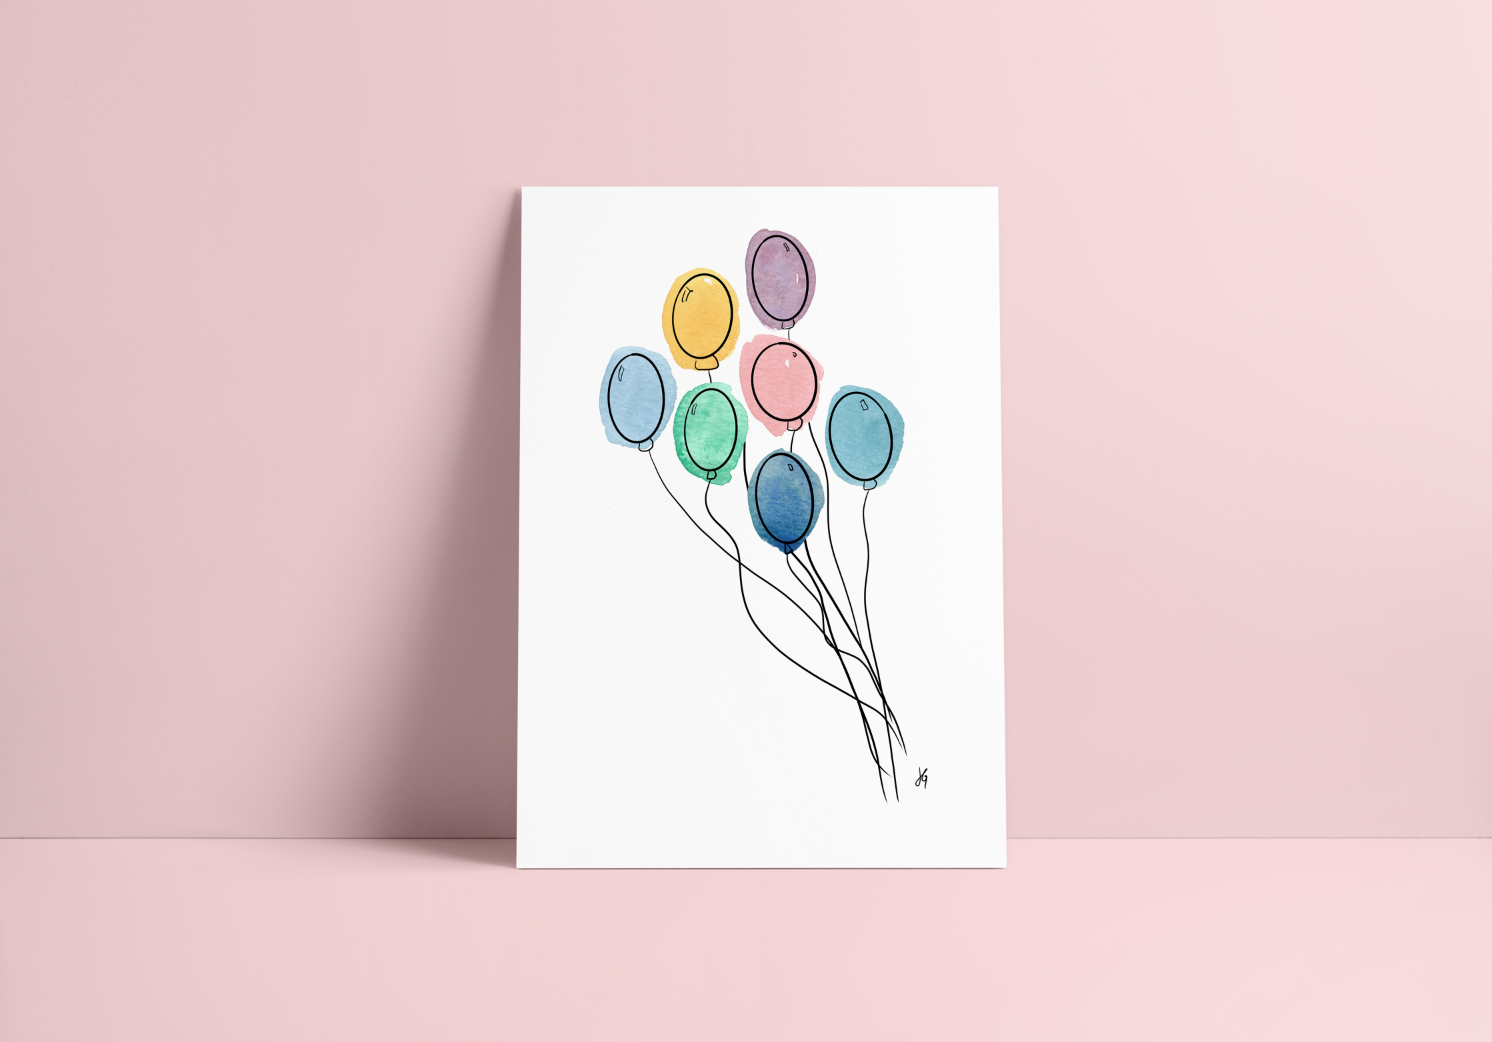 Watercolor balloons, simple, pastel shades, greeting card, blank inside